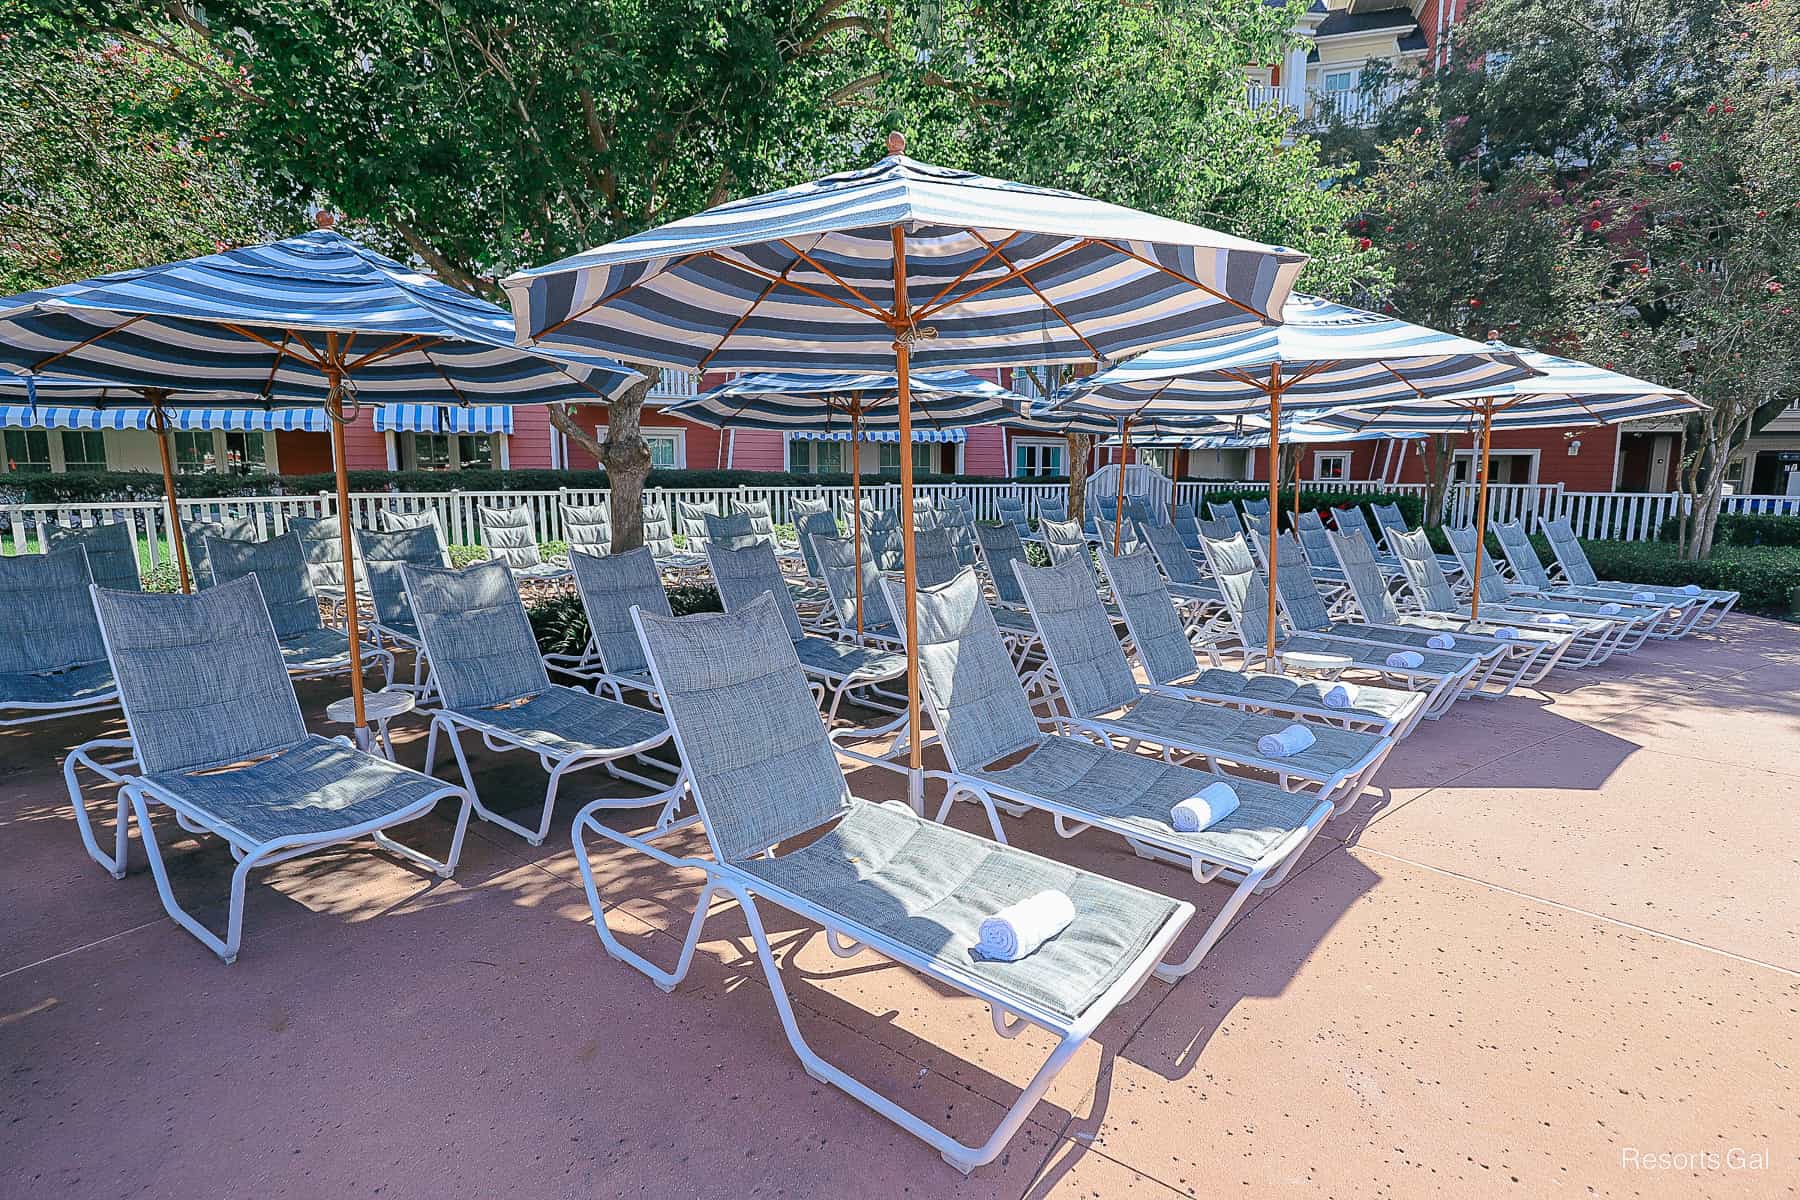 four rows of lounge chairs with umbrellas in a shaded area near the Boardwalk pool 